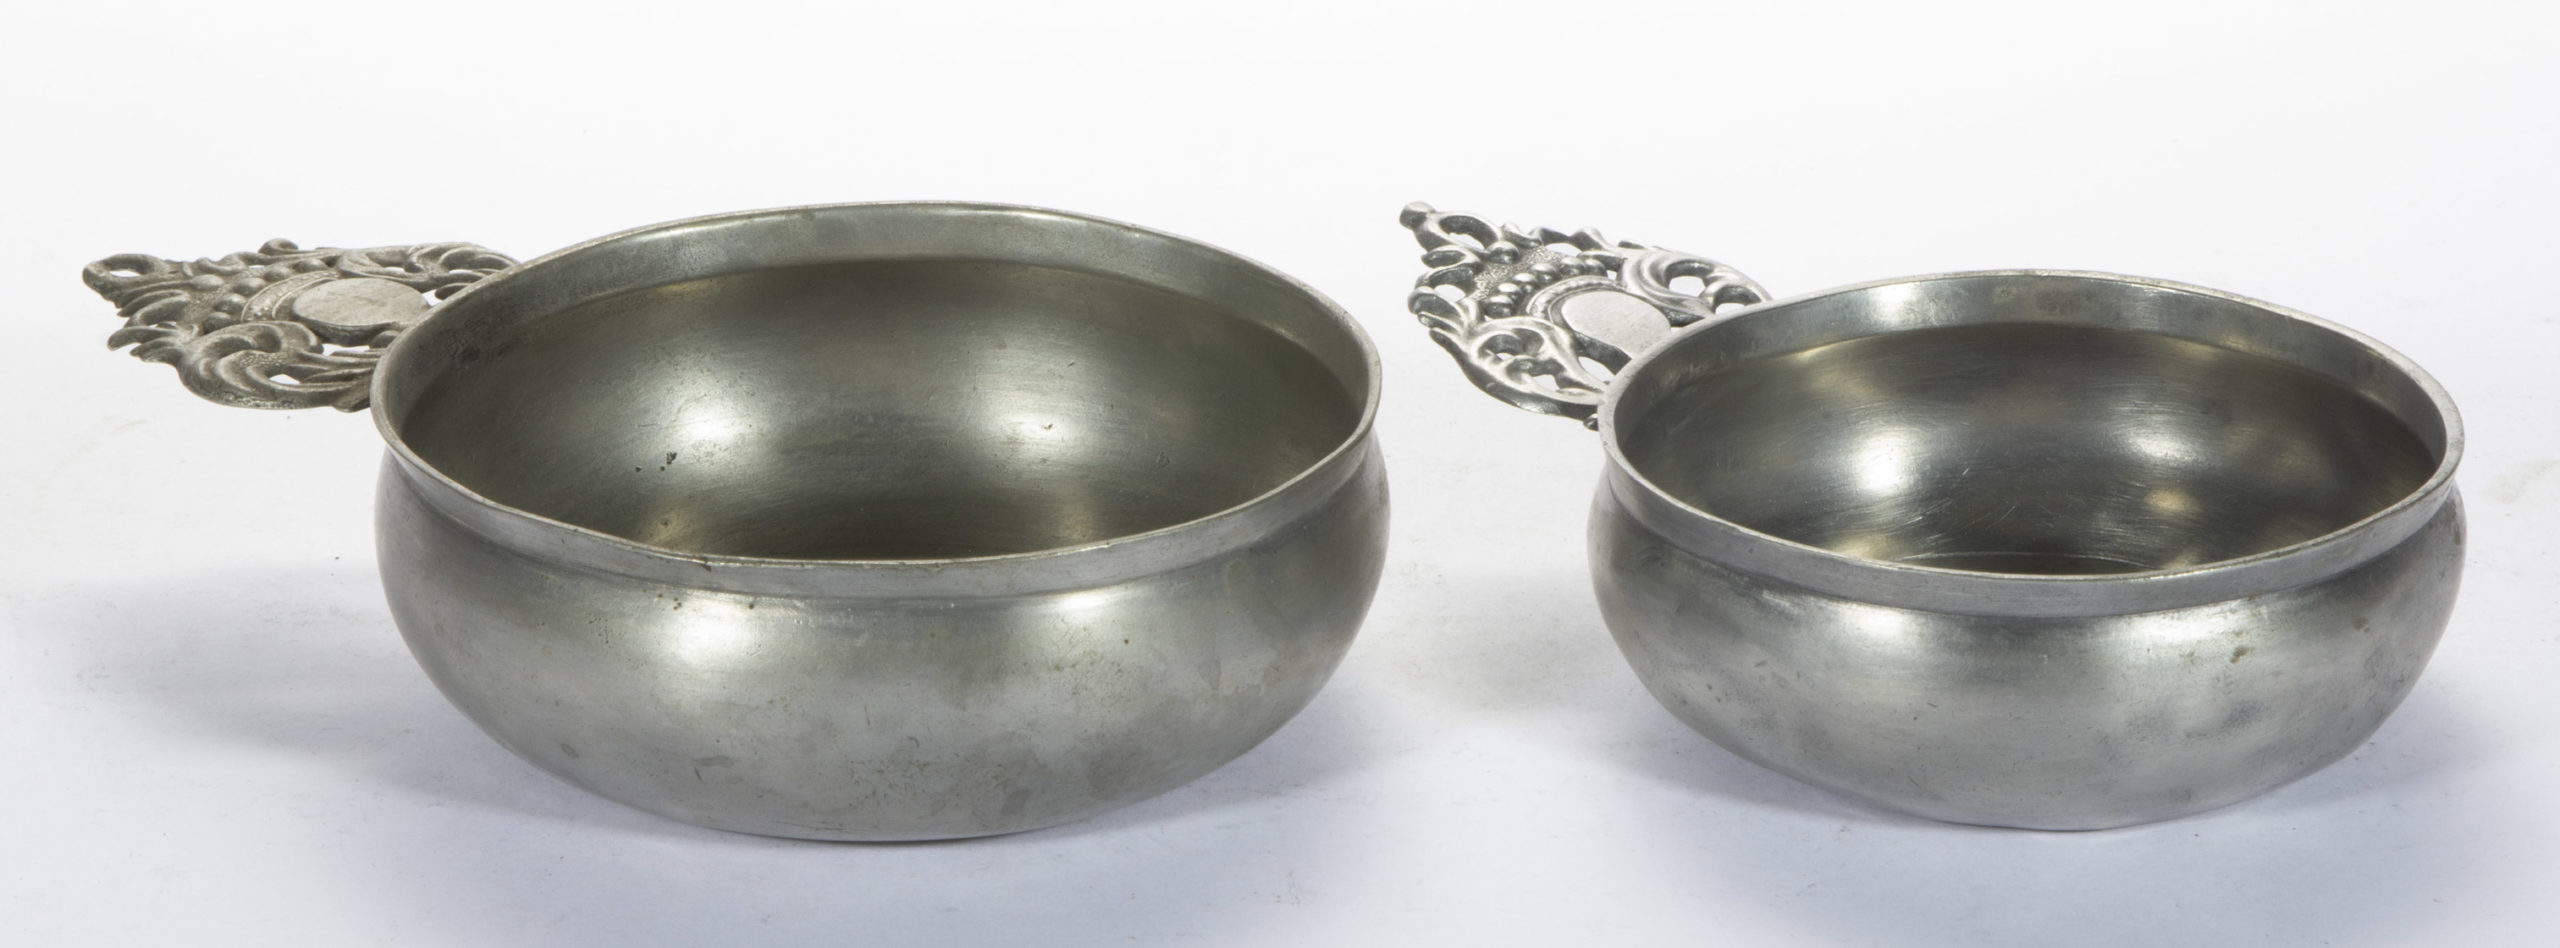 AMERICAN ATTRIBUTED SAMUEL GREEN, BOSTON PEWTER PORRINGERS, LOT OF TWO,